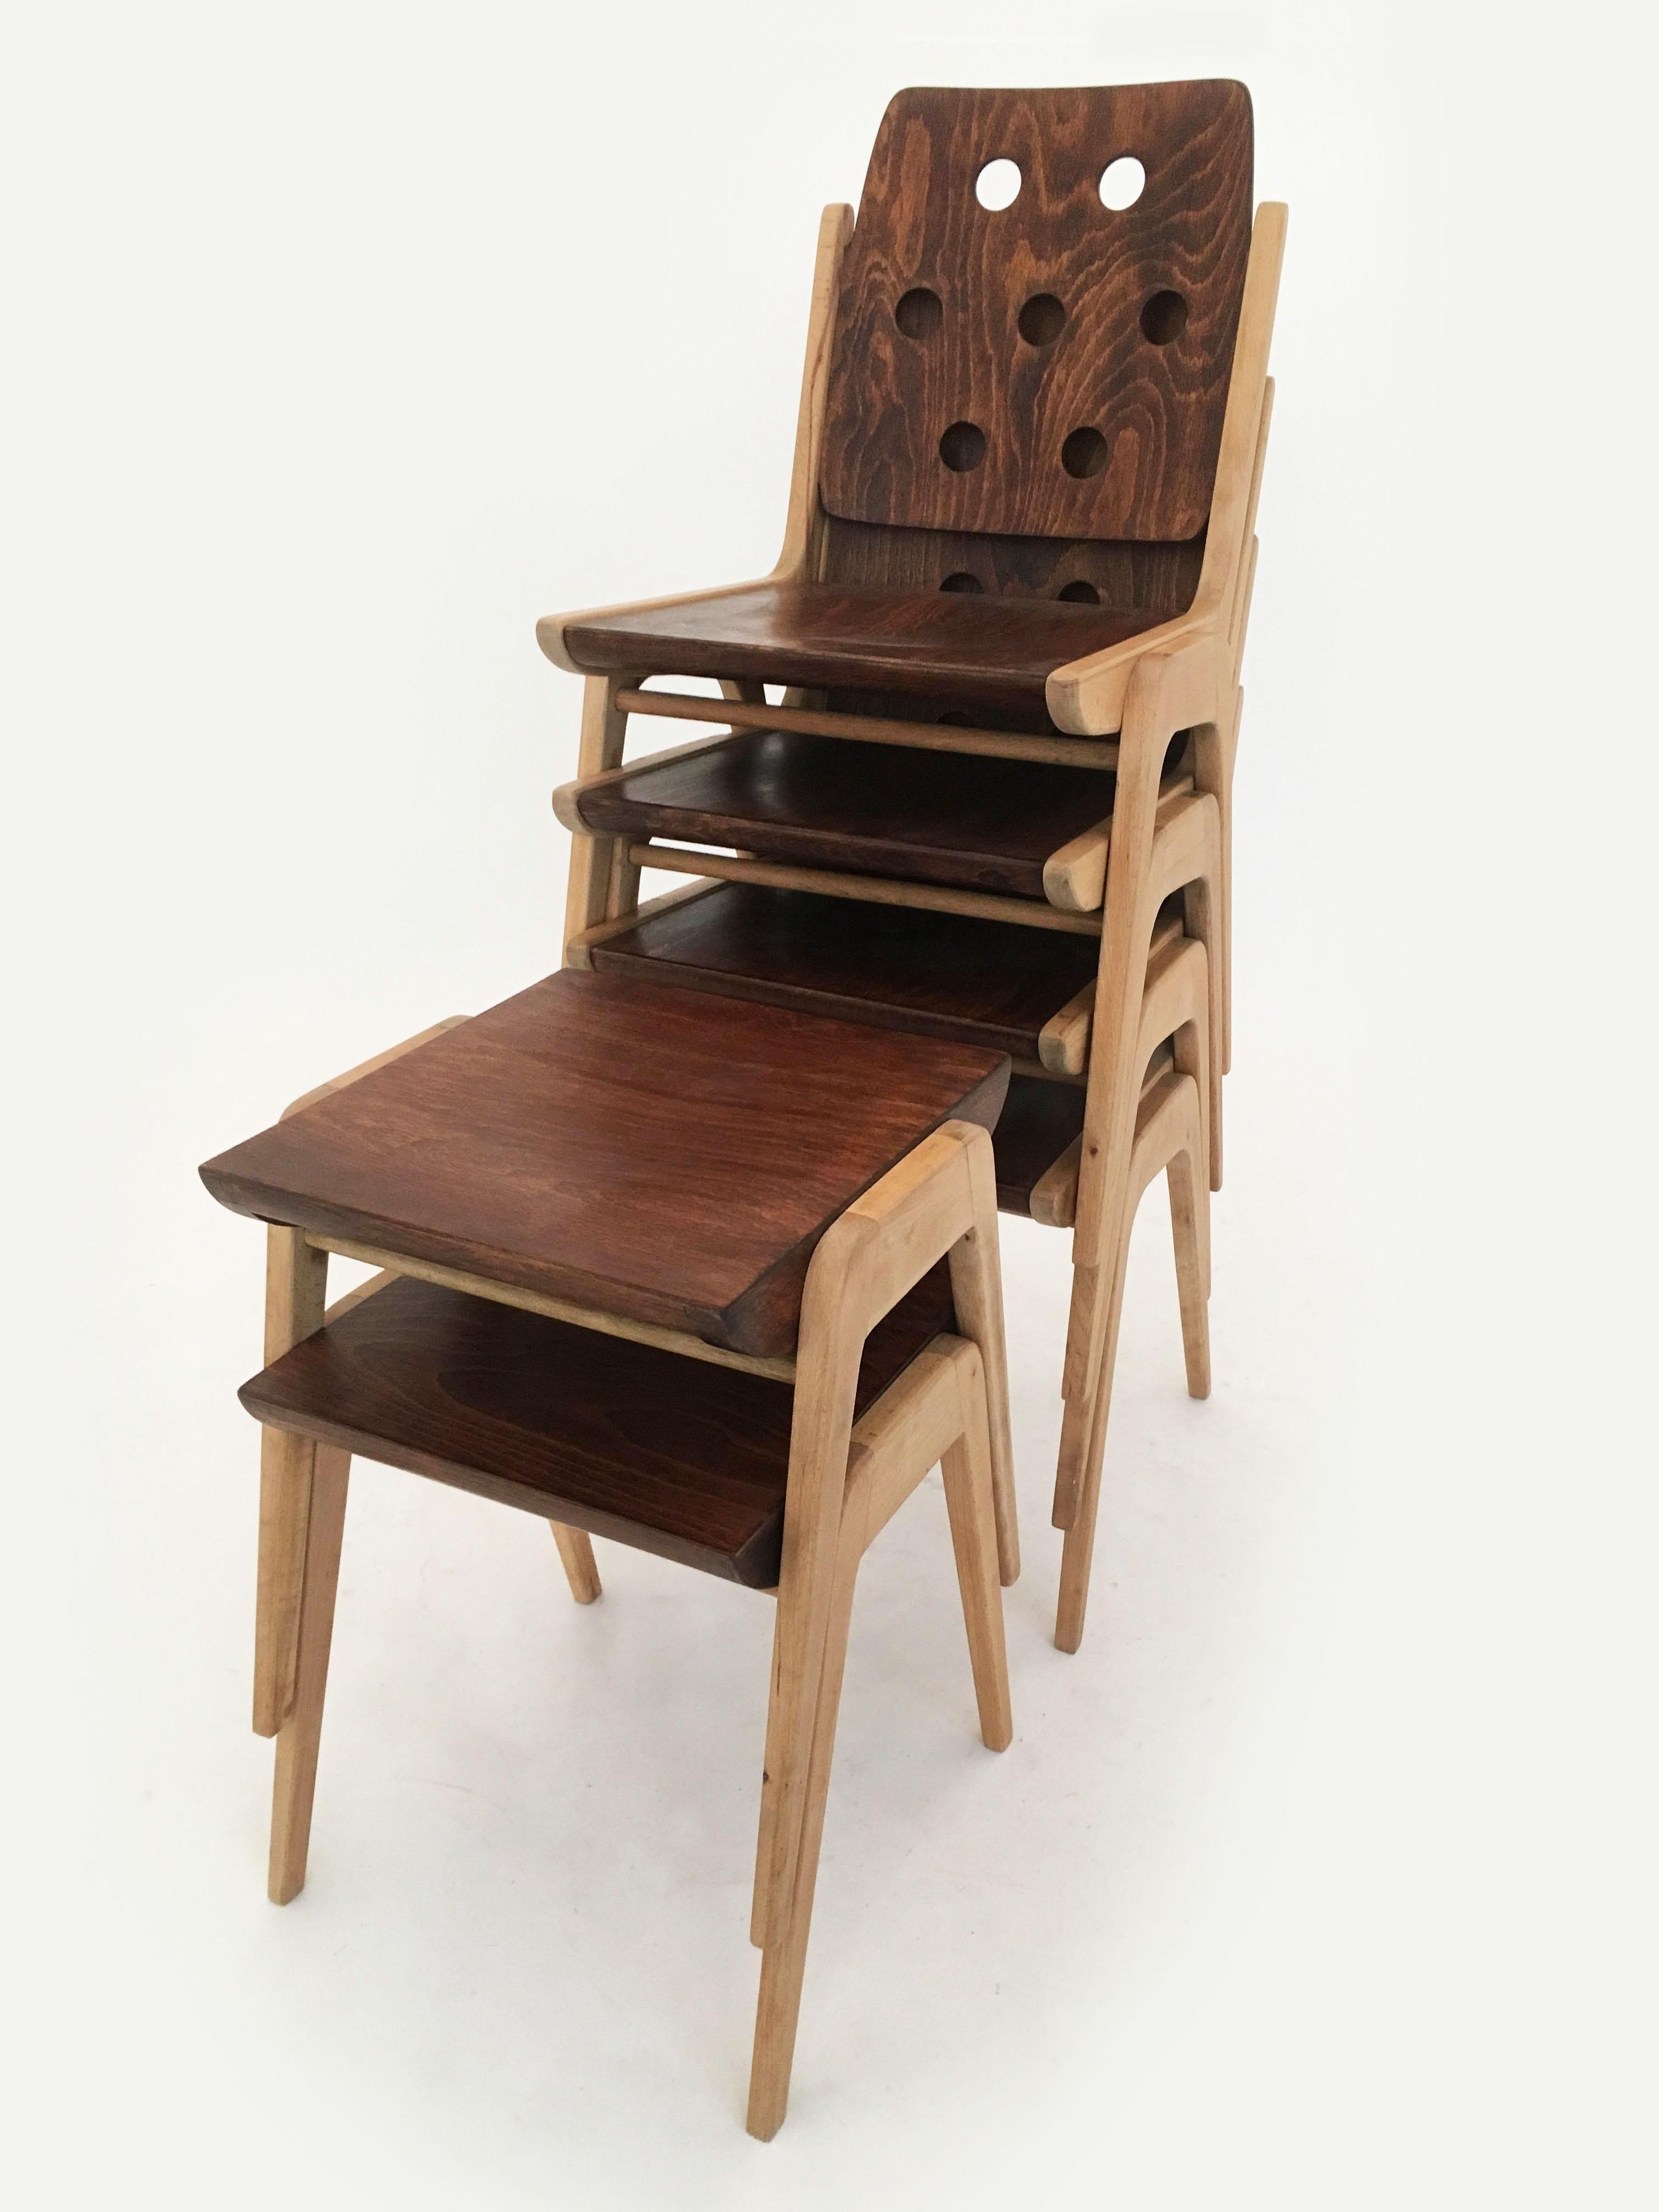 Set of Four Stacking Chairs Franz Schuster, Duo-Colored, Austria 1950s For Sale 11